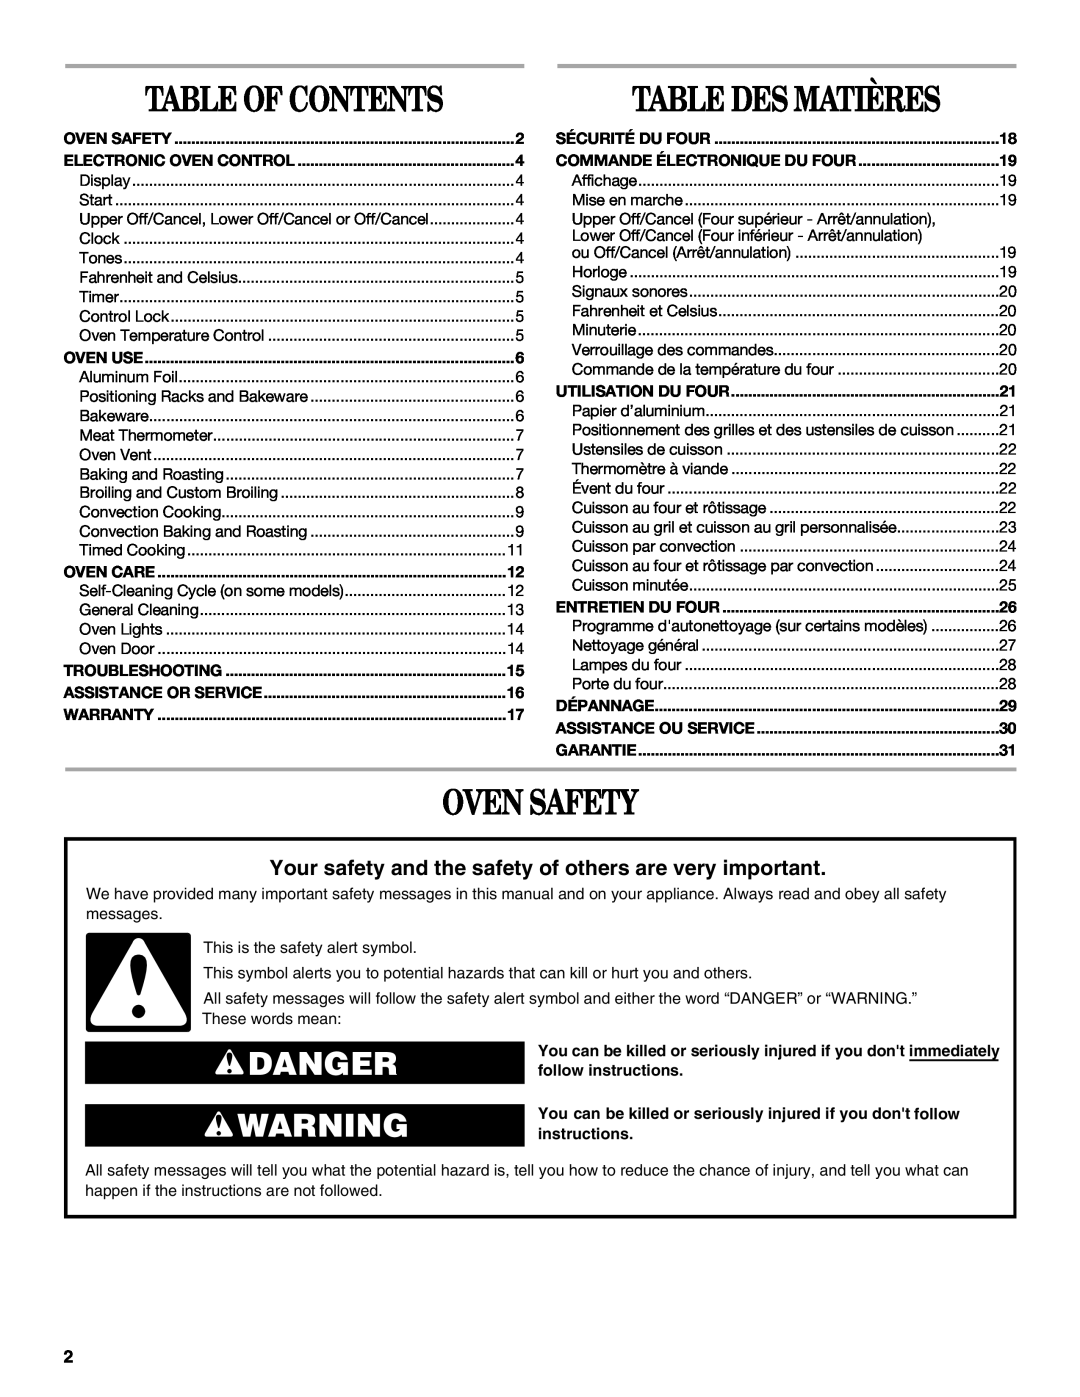 Whirlpool RBD277, RBS277 Oven Safety, Danger, Your safety and the safety of others are very important, Table Of Contents 